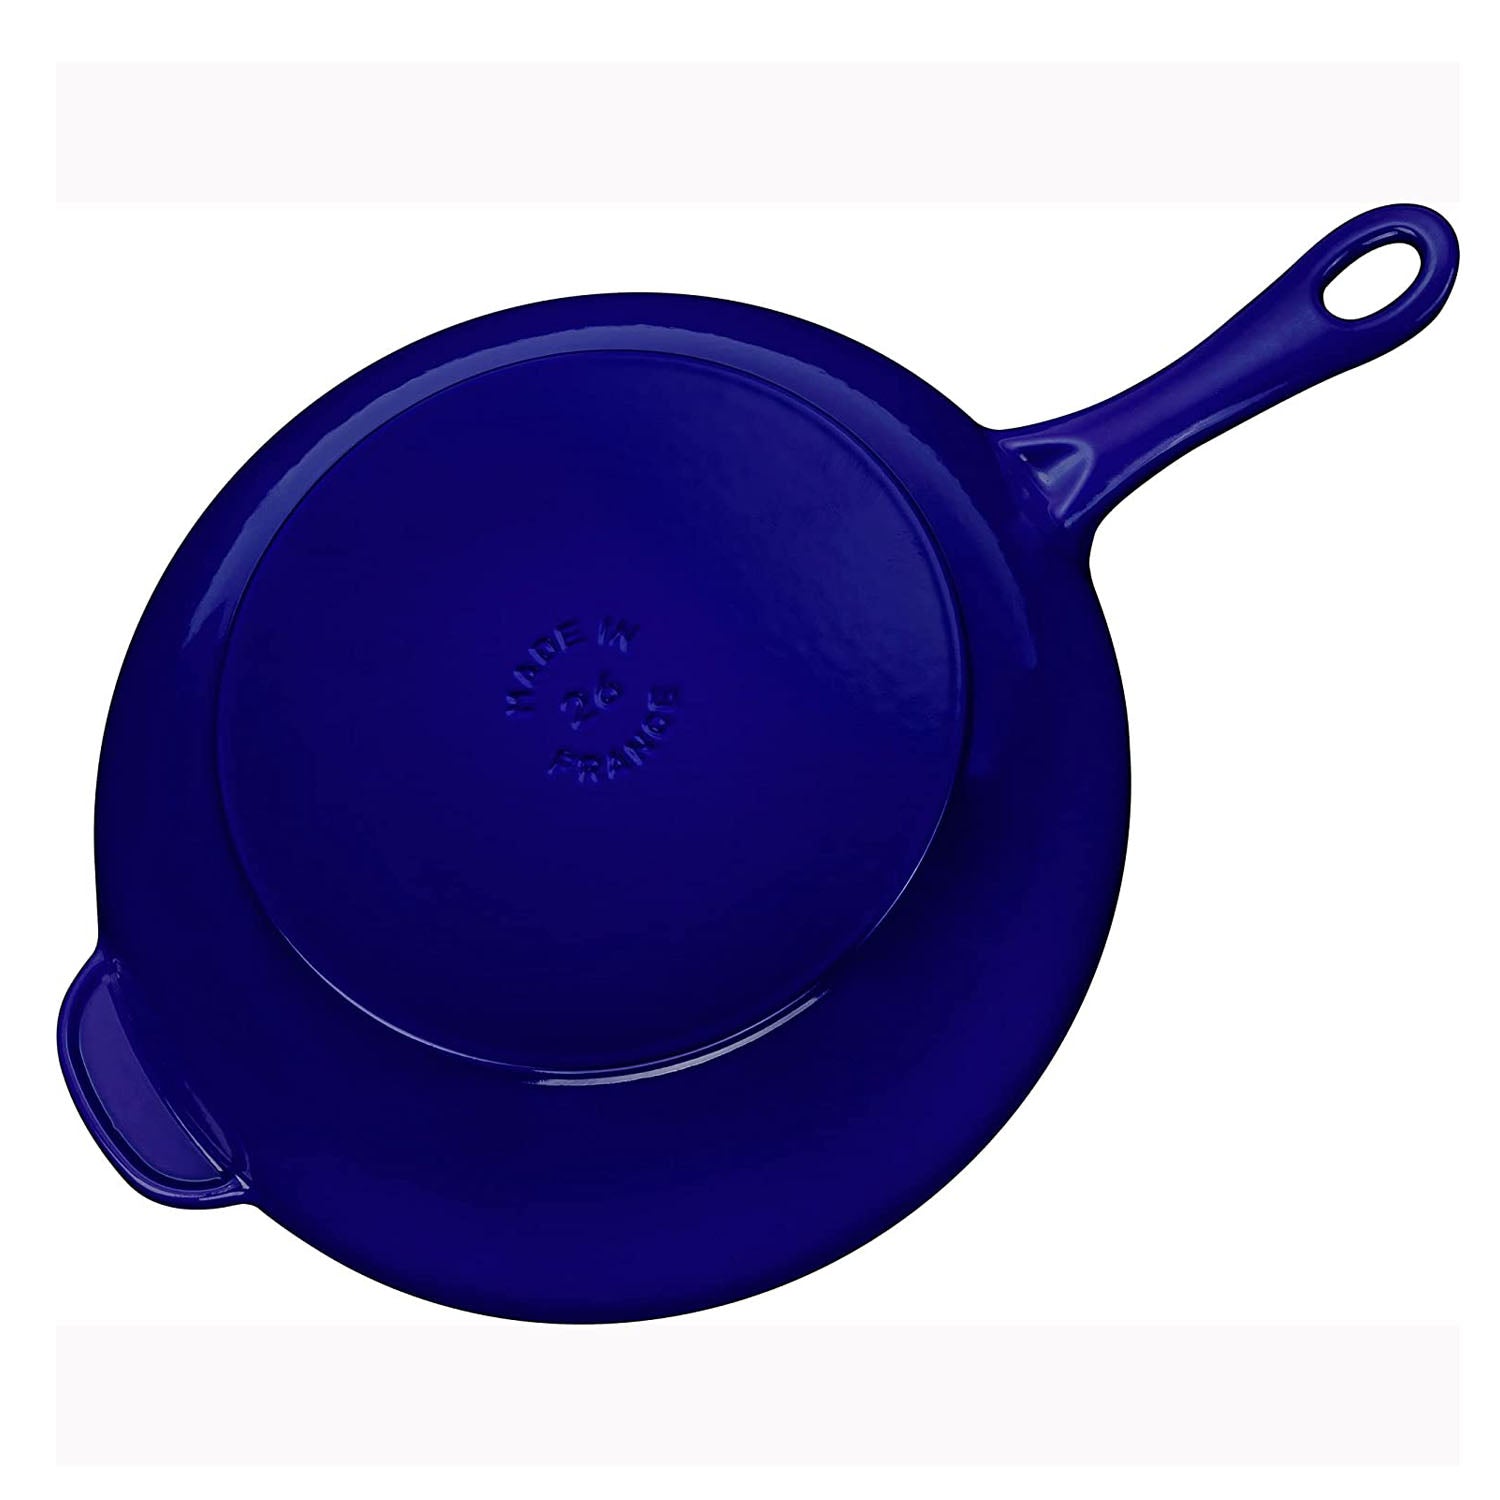  Staub Cast Iron 2.9-qt Daily Pan with Glass Lid - Dark Blue:  Home & Kitchen